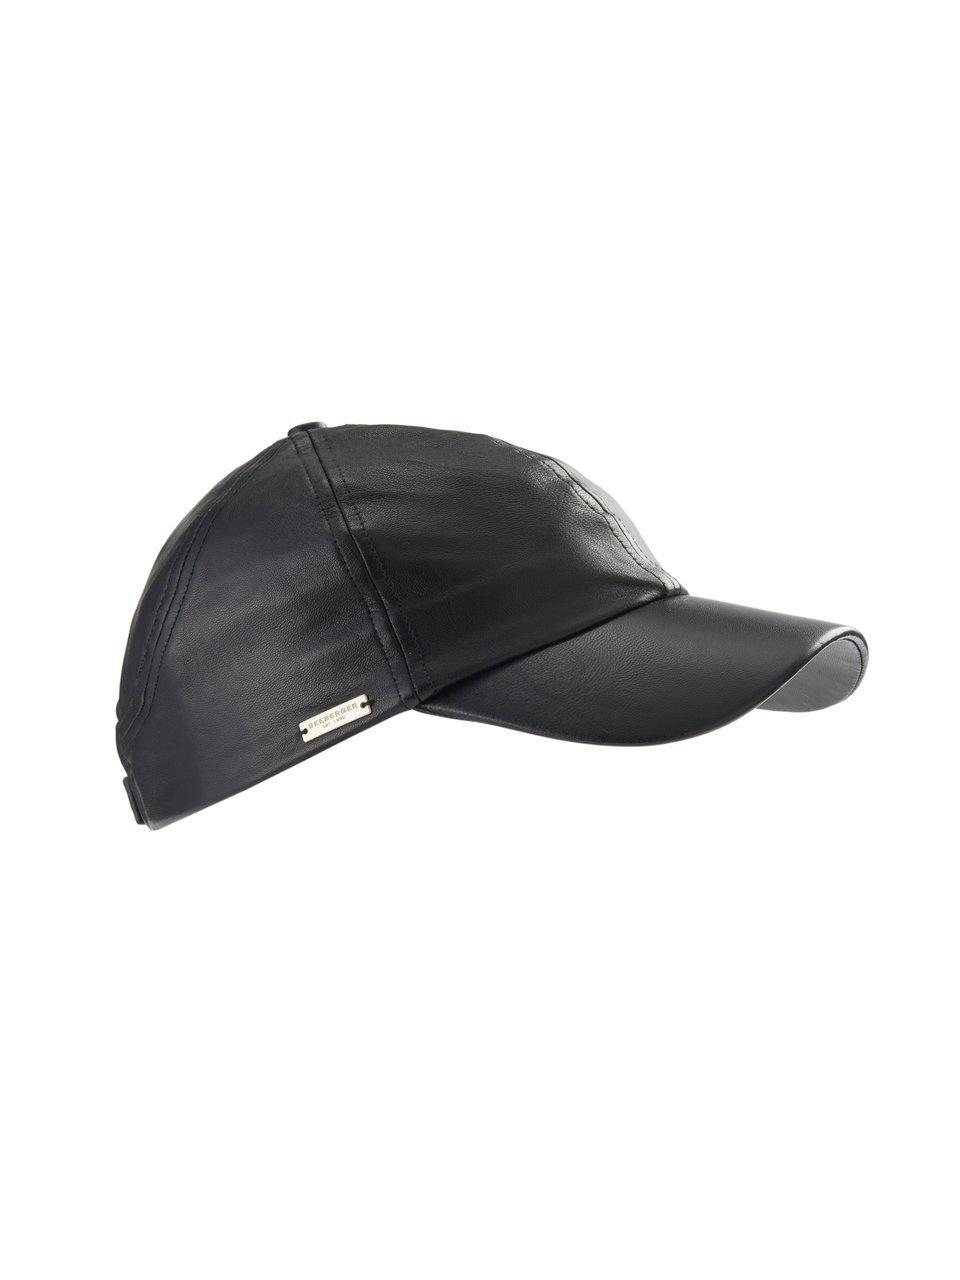 Image of Cap made of leather Seeberger black